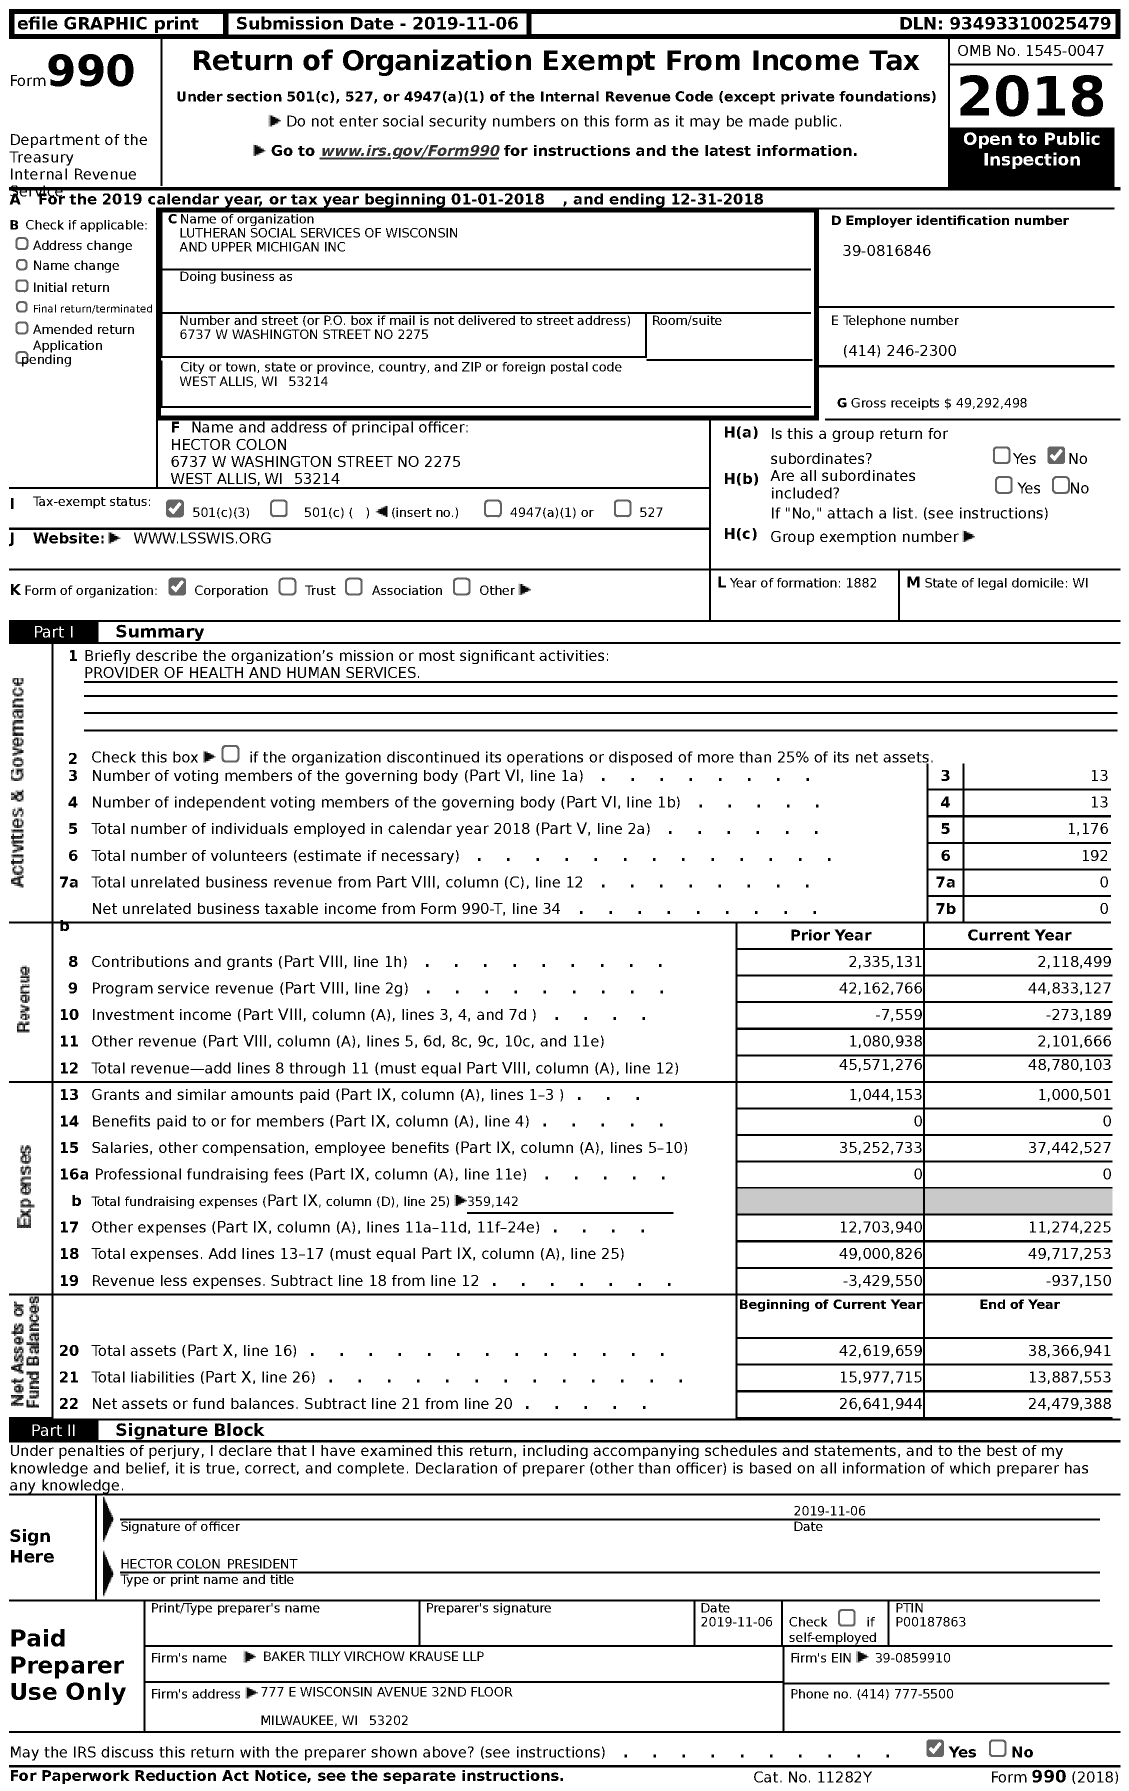 Image of first page of 2018 Form 990 for Lutheran Social Services of Wisconsin and Upper Michigan (LSS)